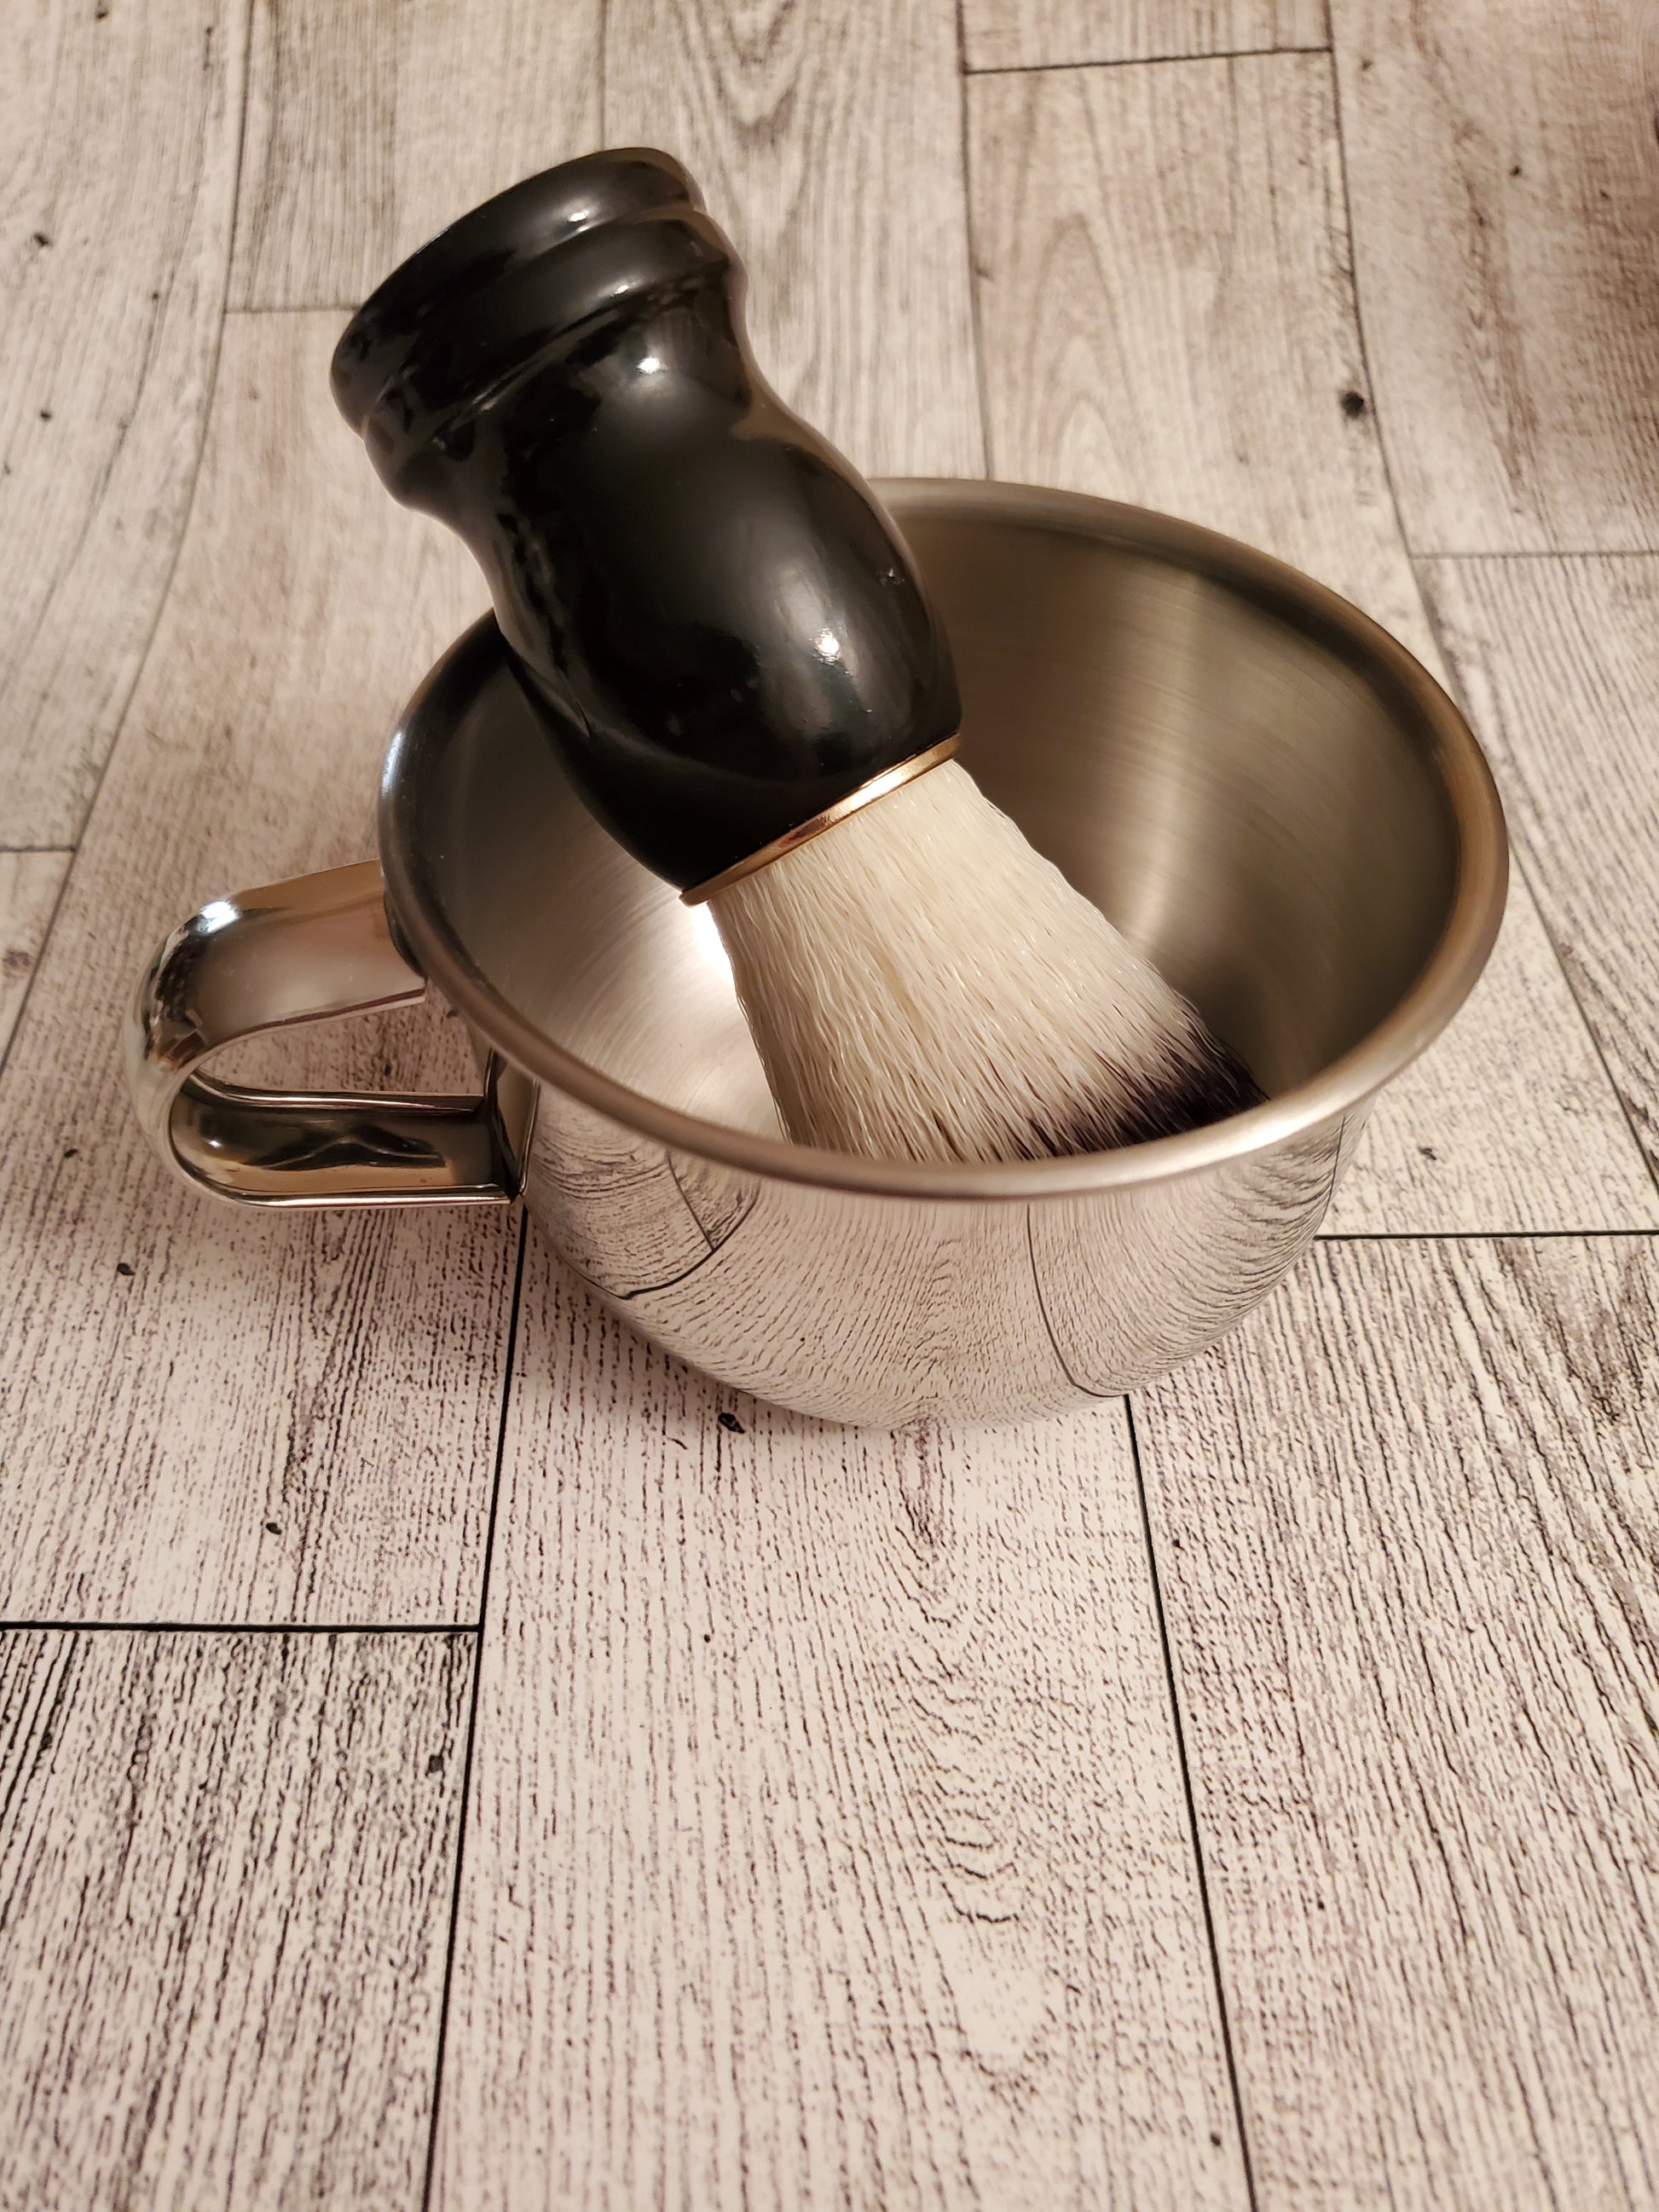 Shave Bowl, stainless steel, shown with Shave Brush black handle. 